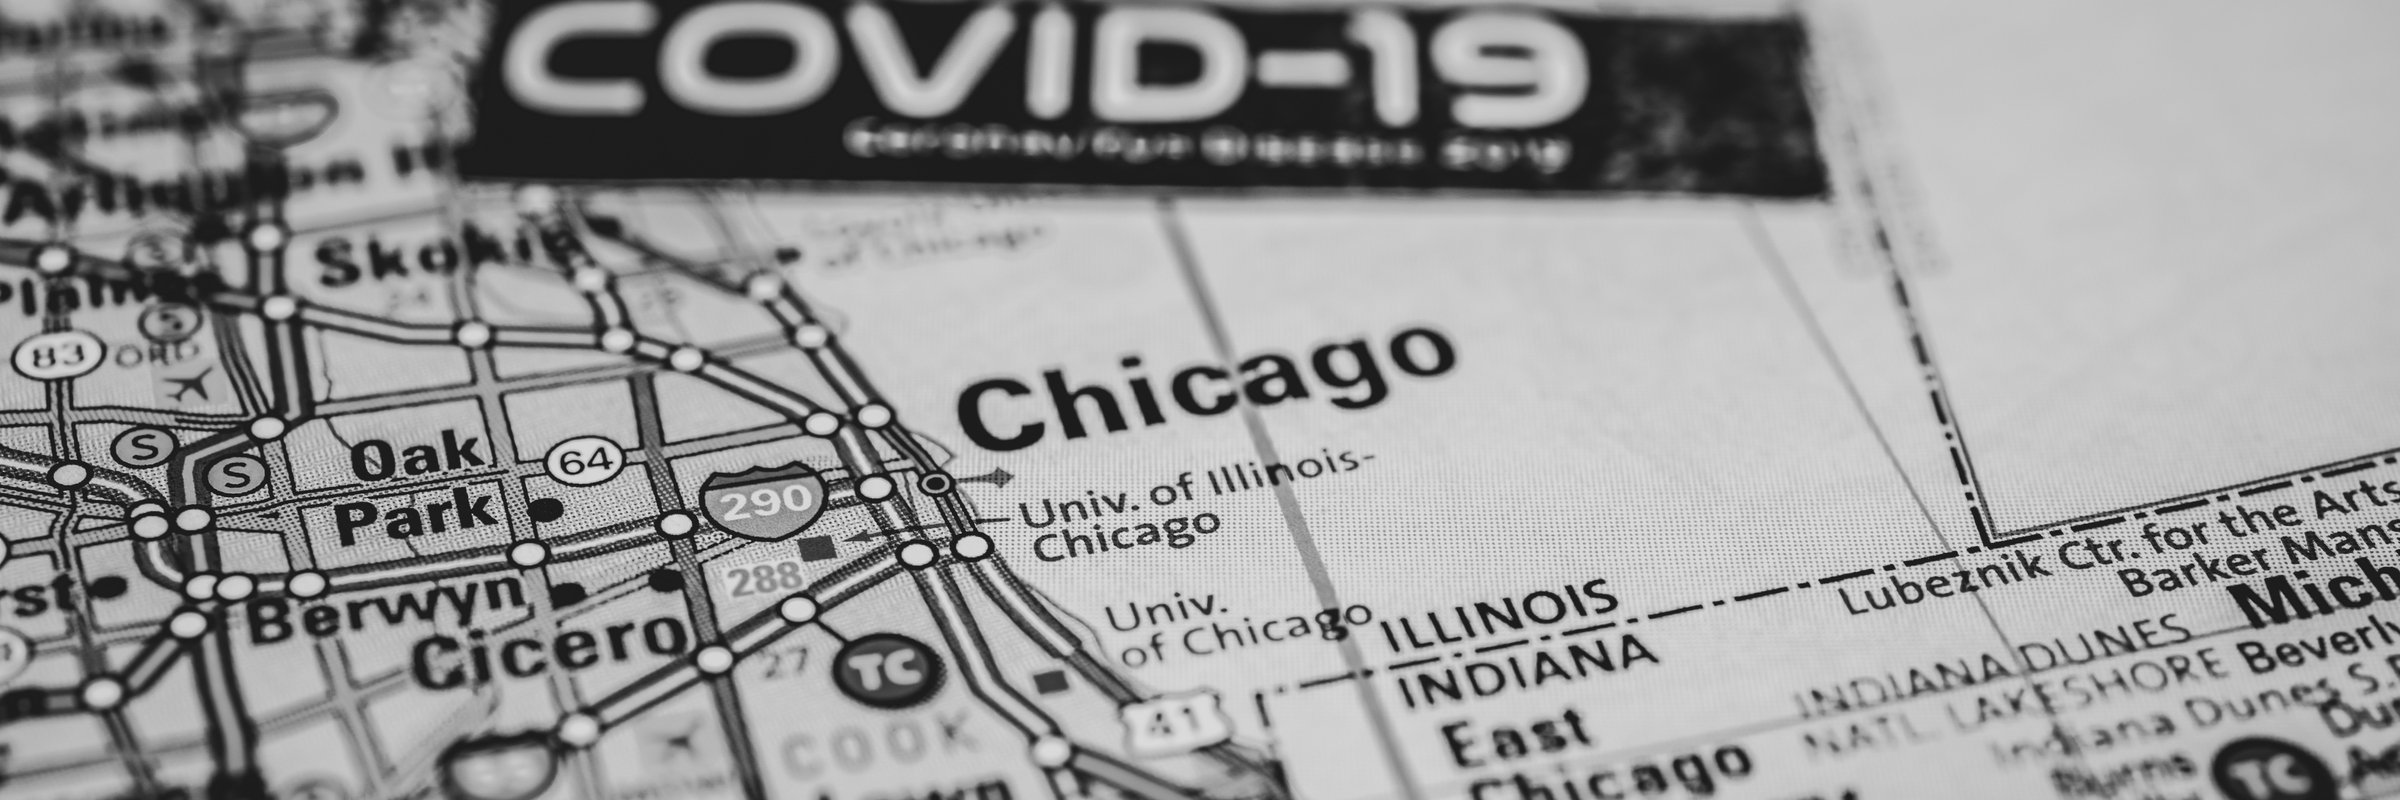 18,849 more Chicagoans have died over the past two years than what would be expected. It goes beyond COVID. Here’s what happened, and what the future may look like.